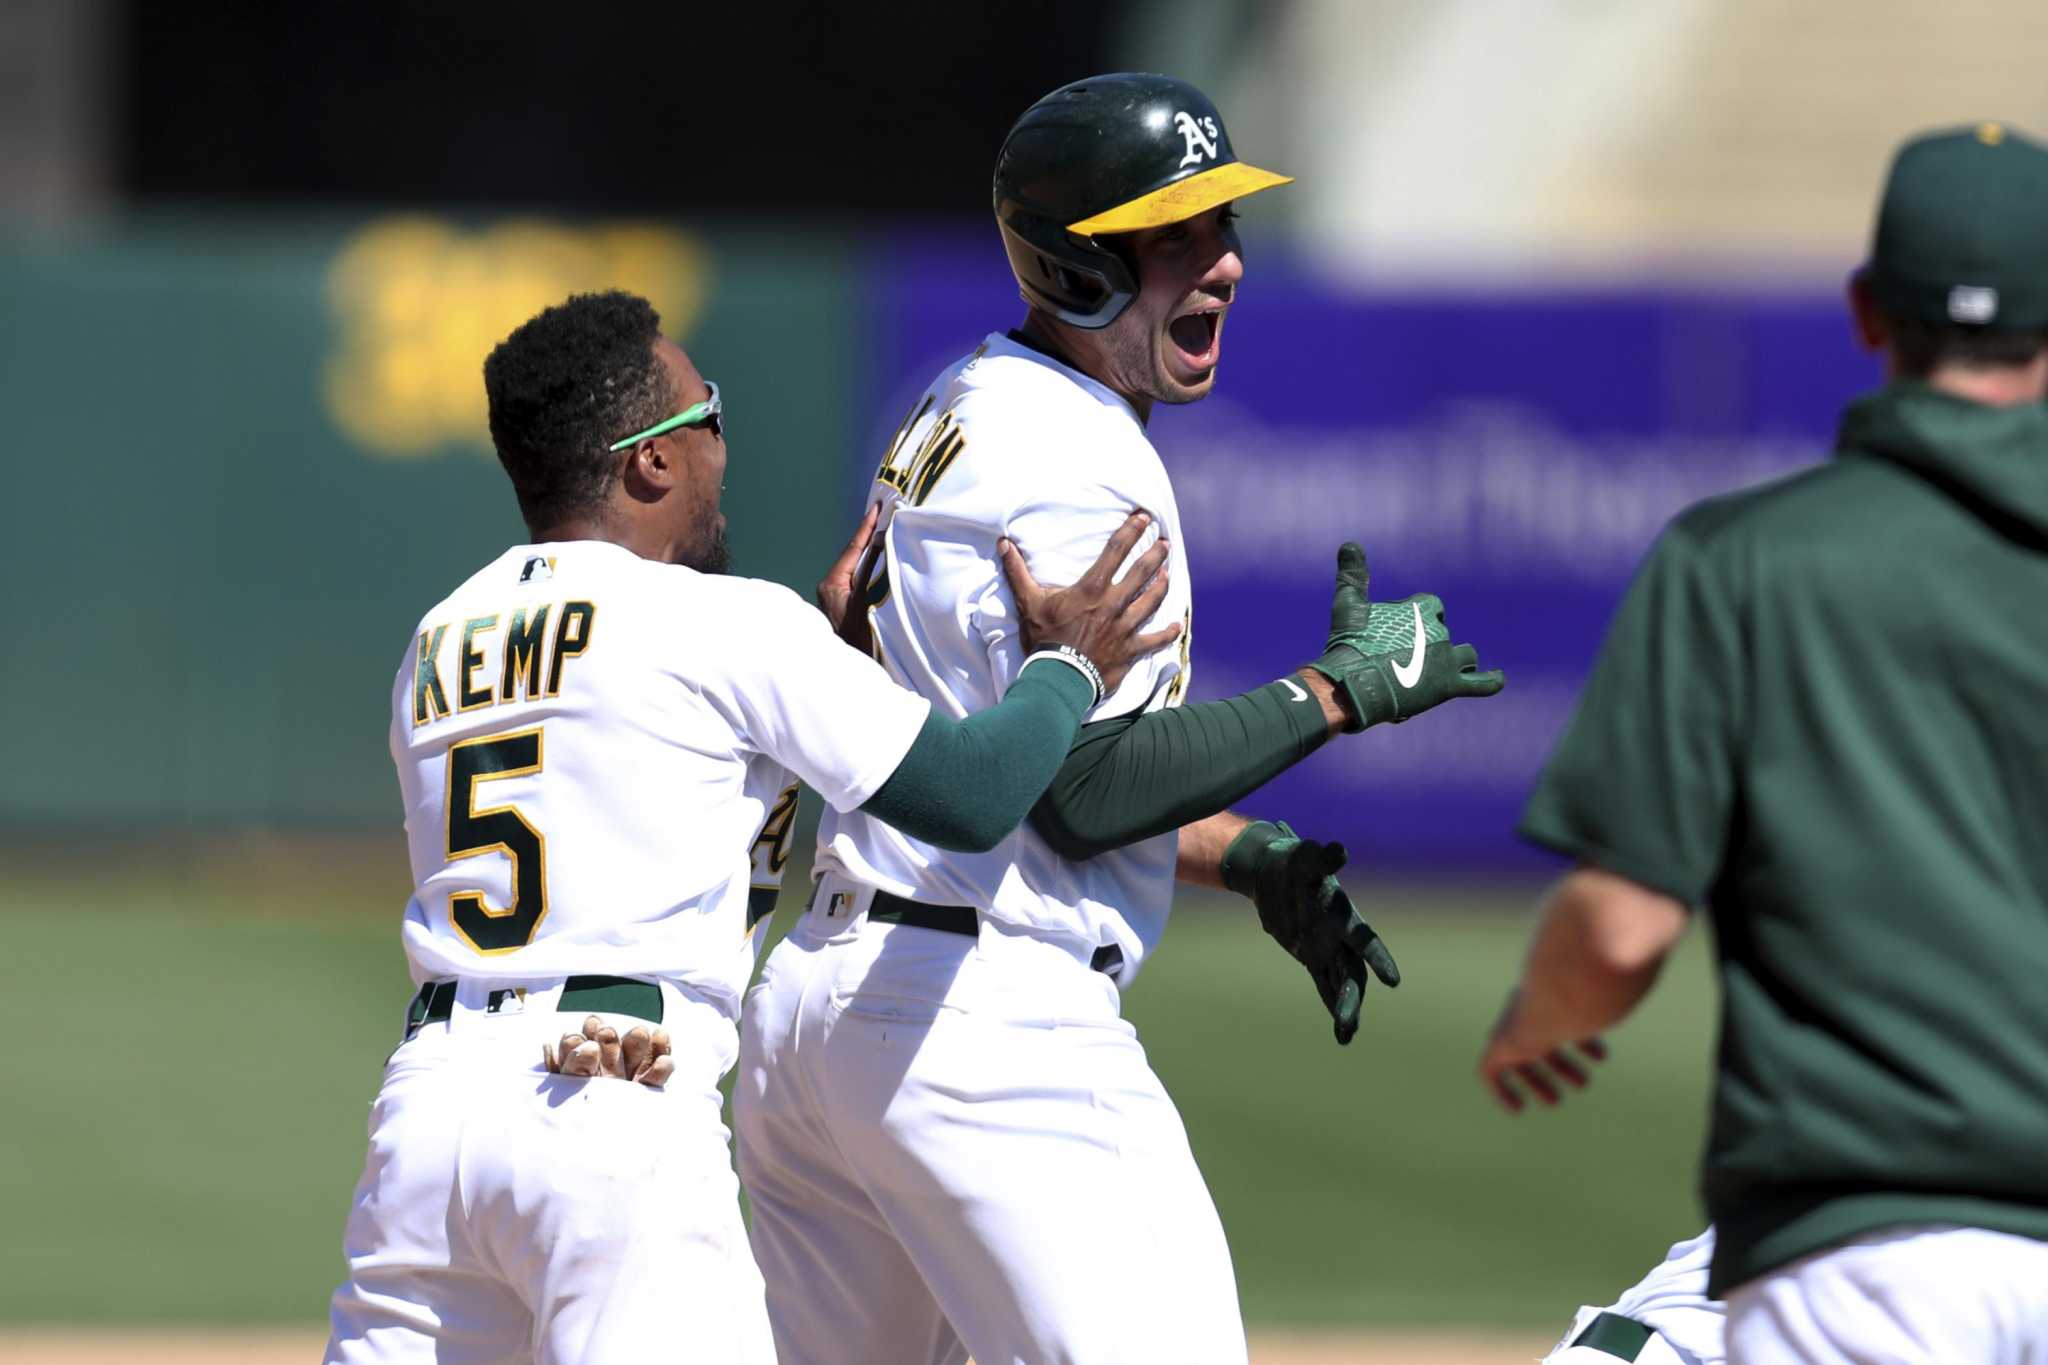 Walk-off this way: Detailing the A's first 9 walk-off wins of 2021